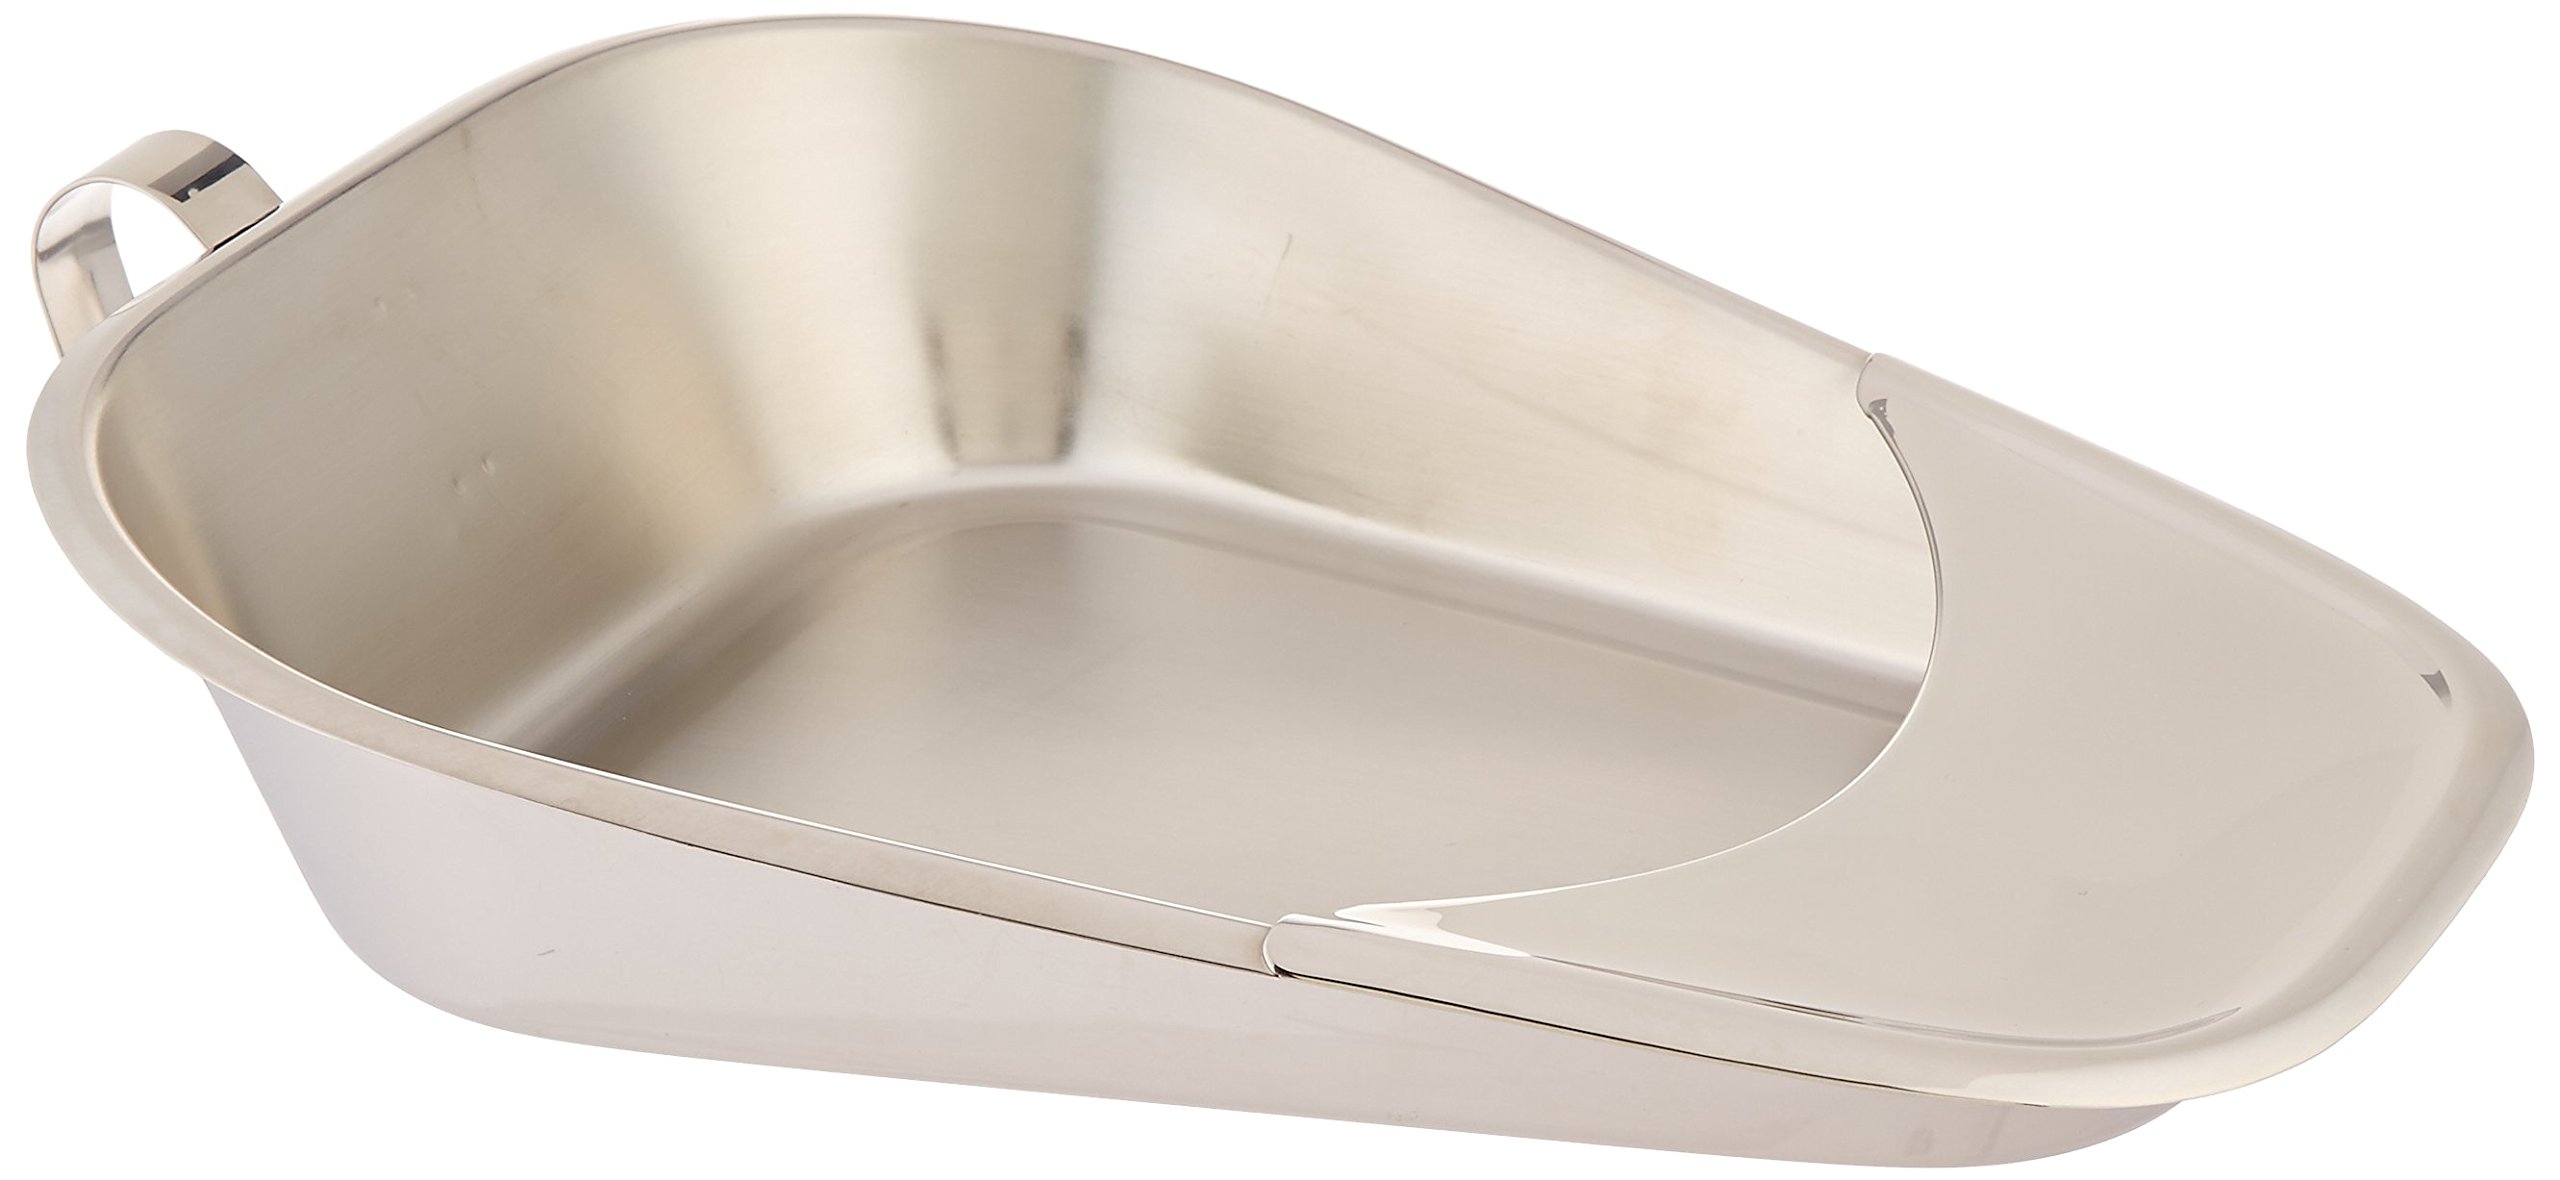 Grafco Fracture Bed Pan, Stainless Steel Female Urinal, 3